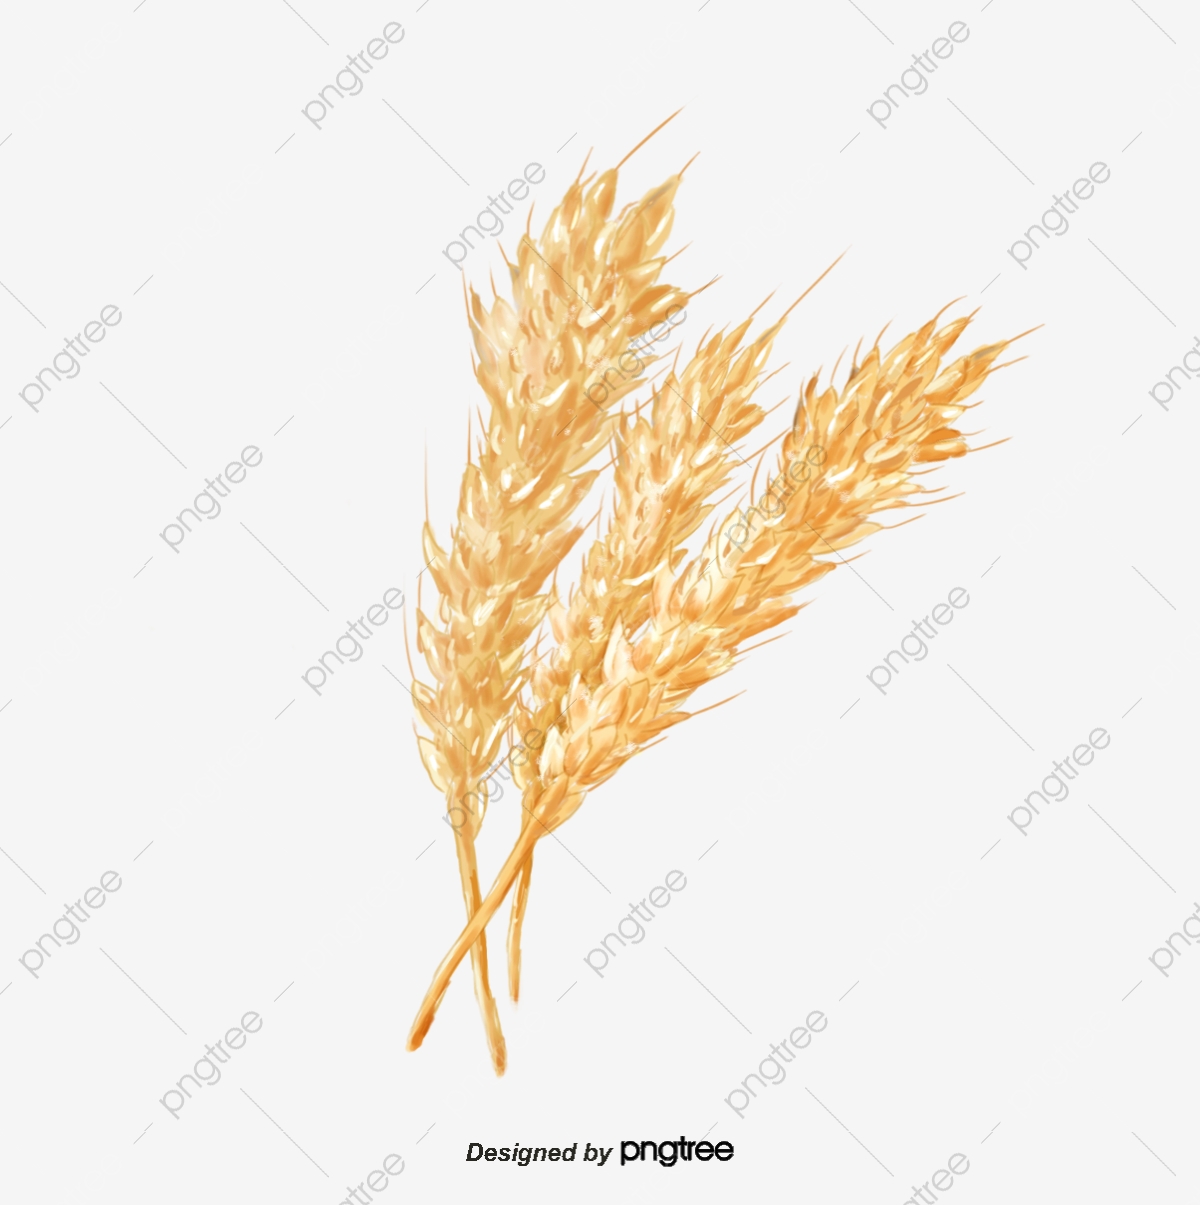 Grain clipart golden wheat. Hand painted botany unhusked